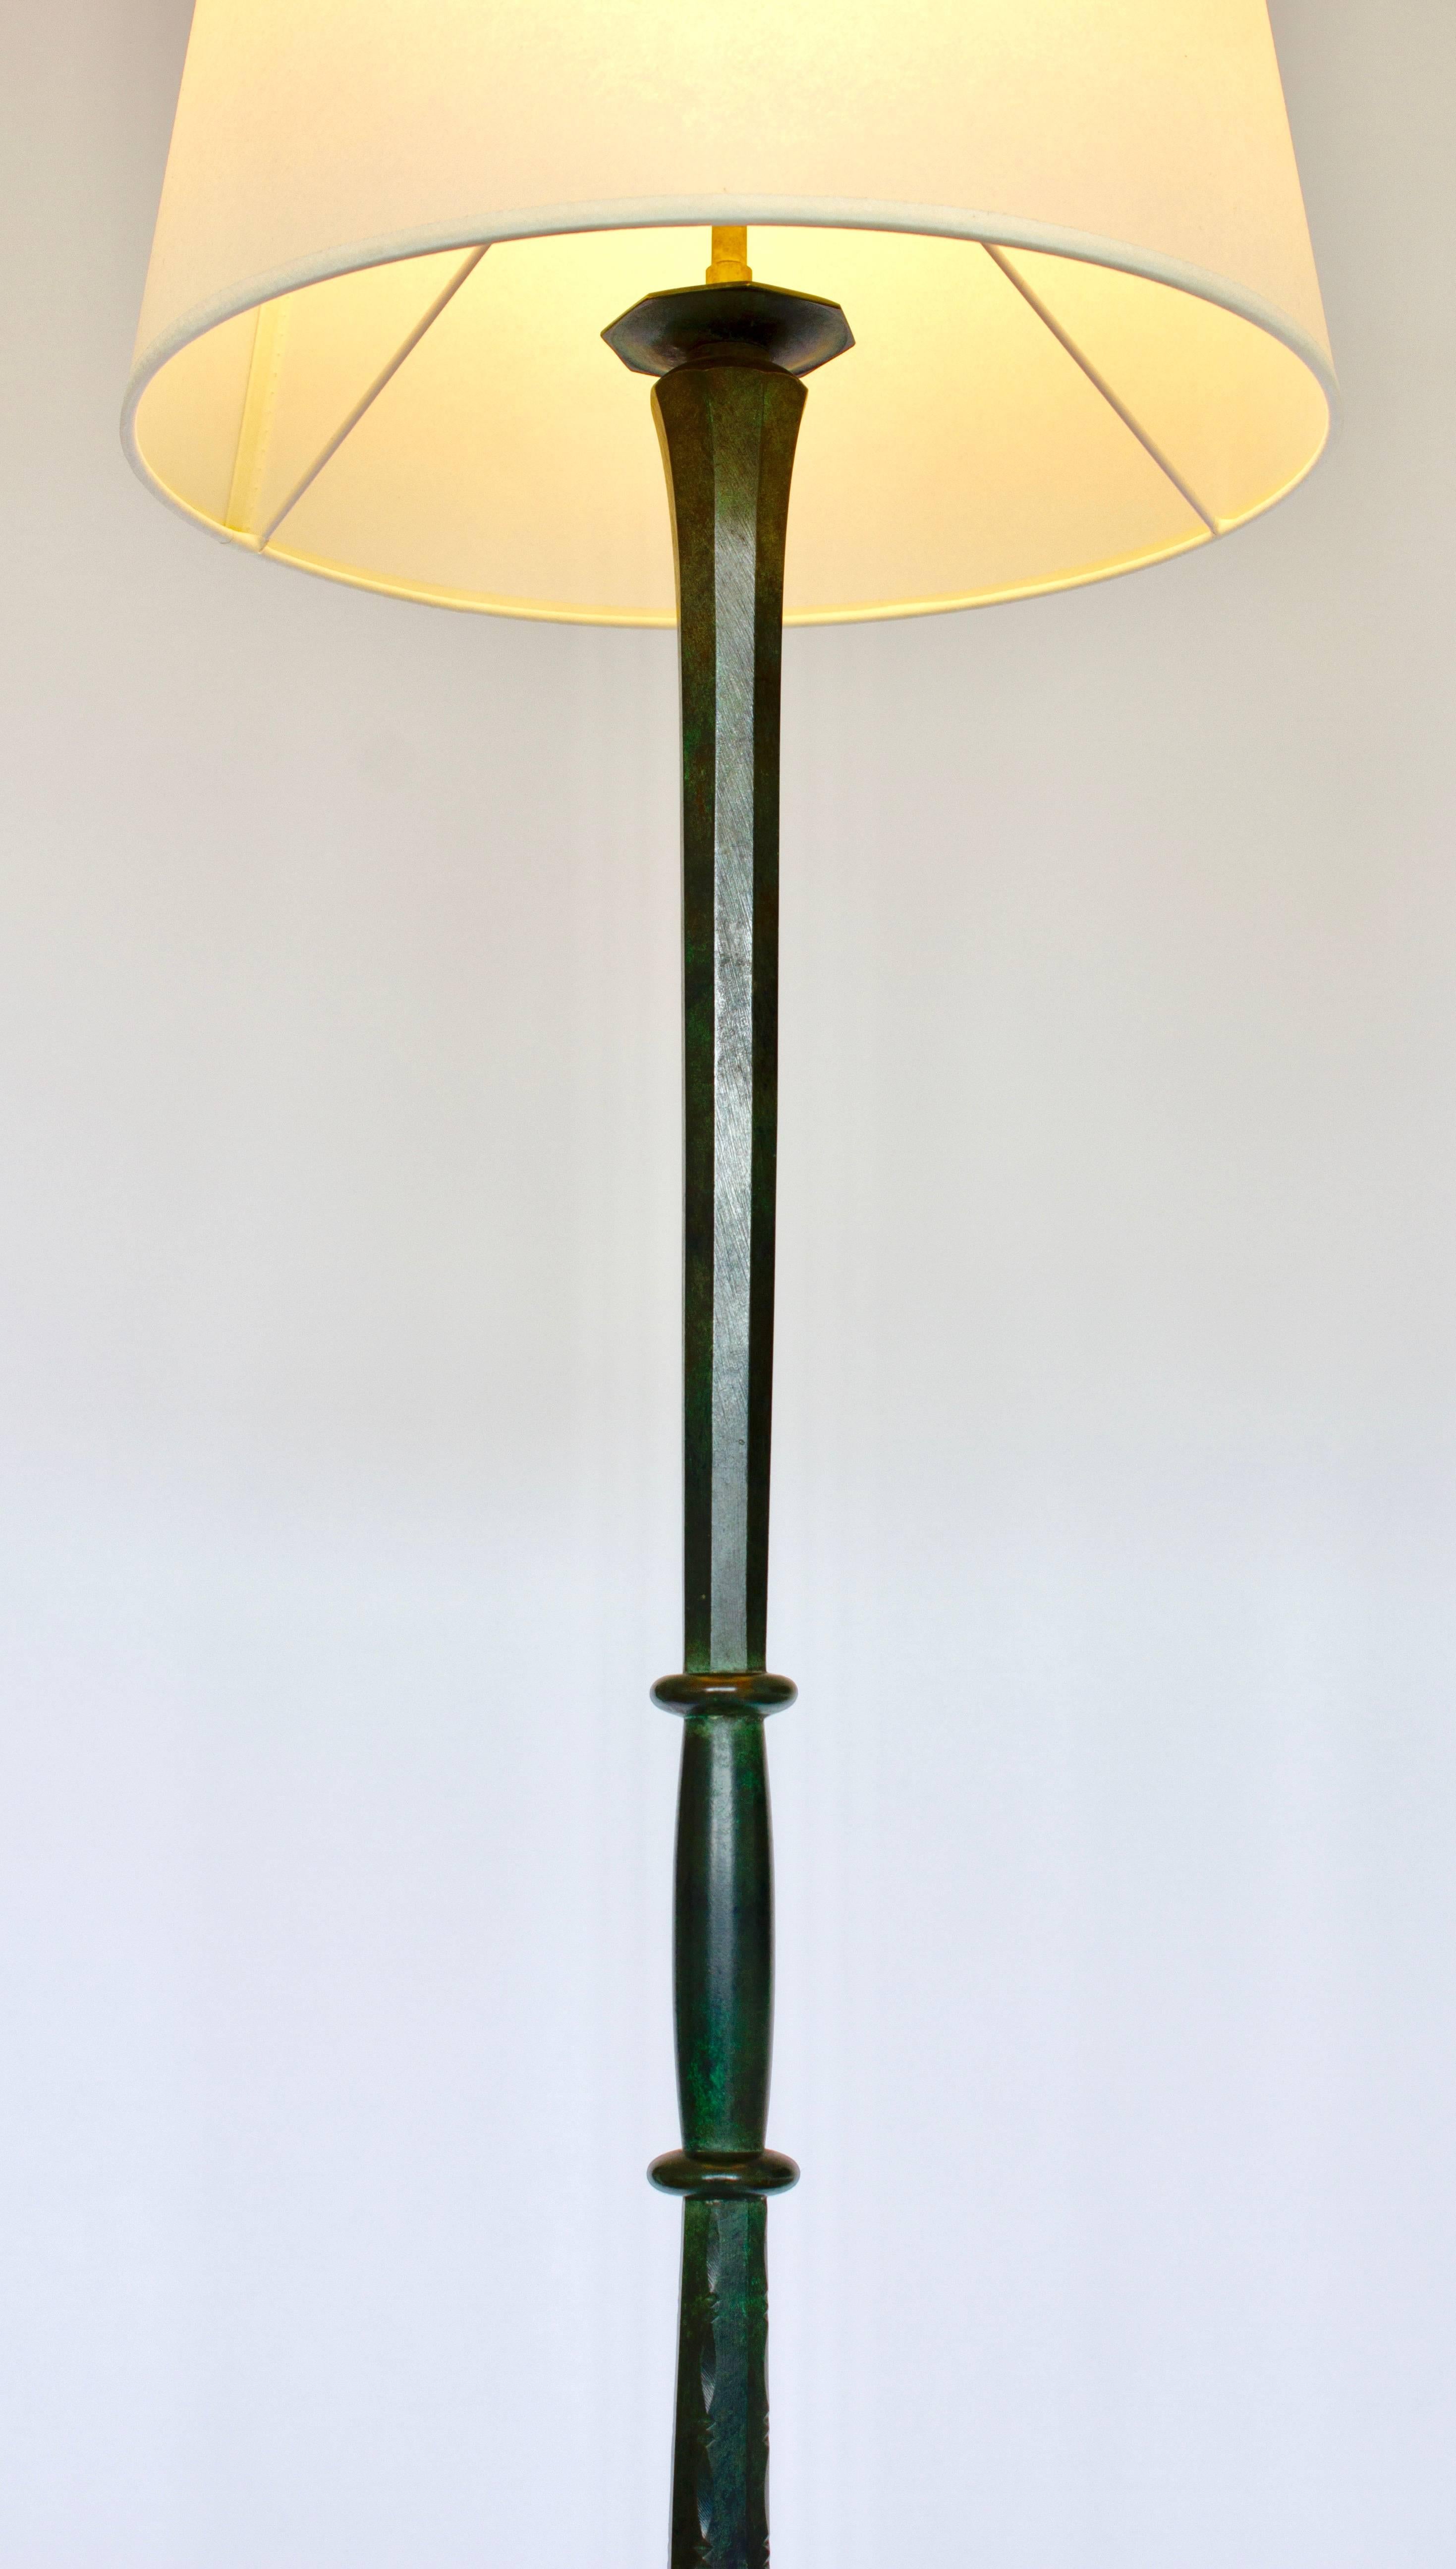 France, circa 1930.
Bronze Work by Philippe Genet and Lucien Michon.
Green skated bronze with chiseled motive.
This lamp shines with its elegance, its beautiful lines and its skated chasing.
Dimensions: Height 170 cm (without lampshade) and 210